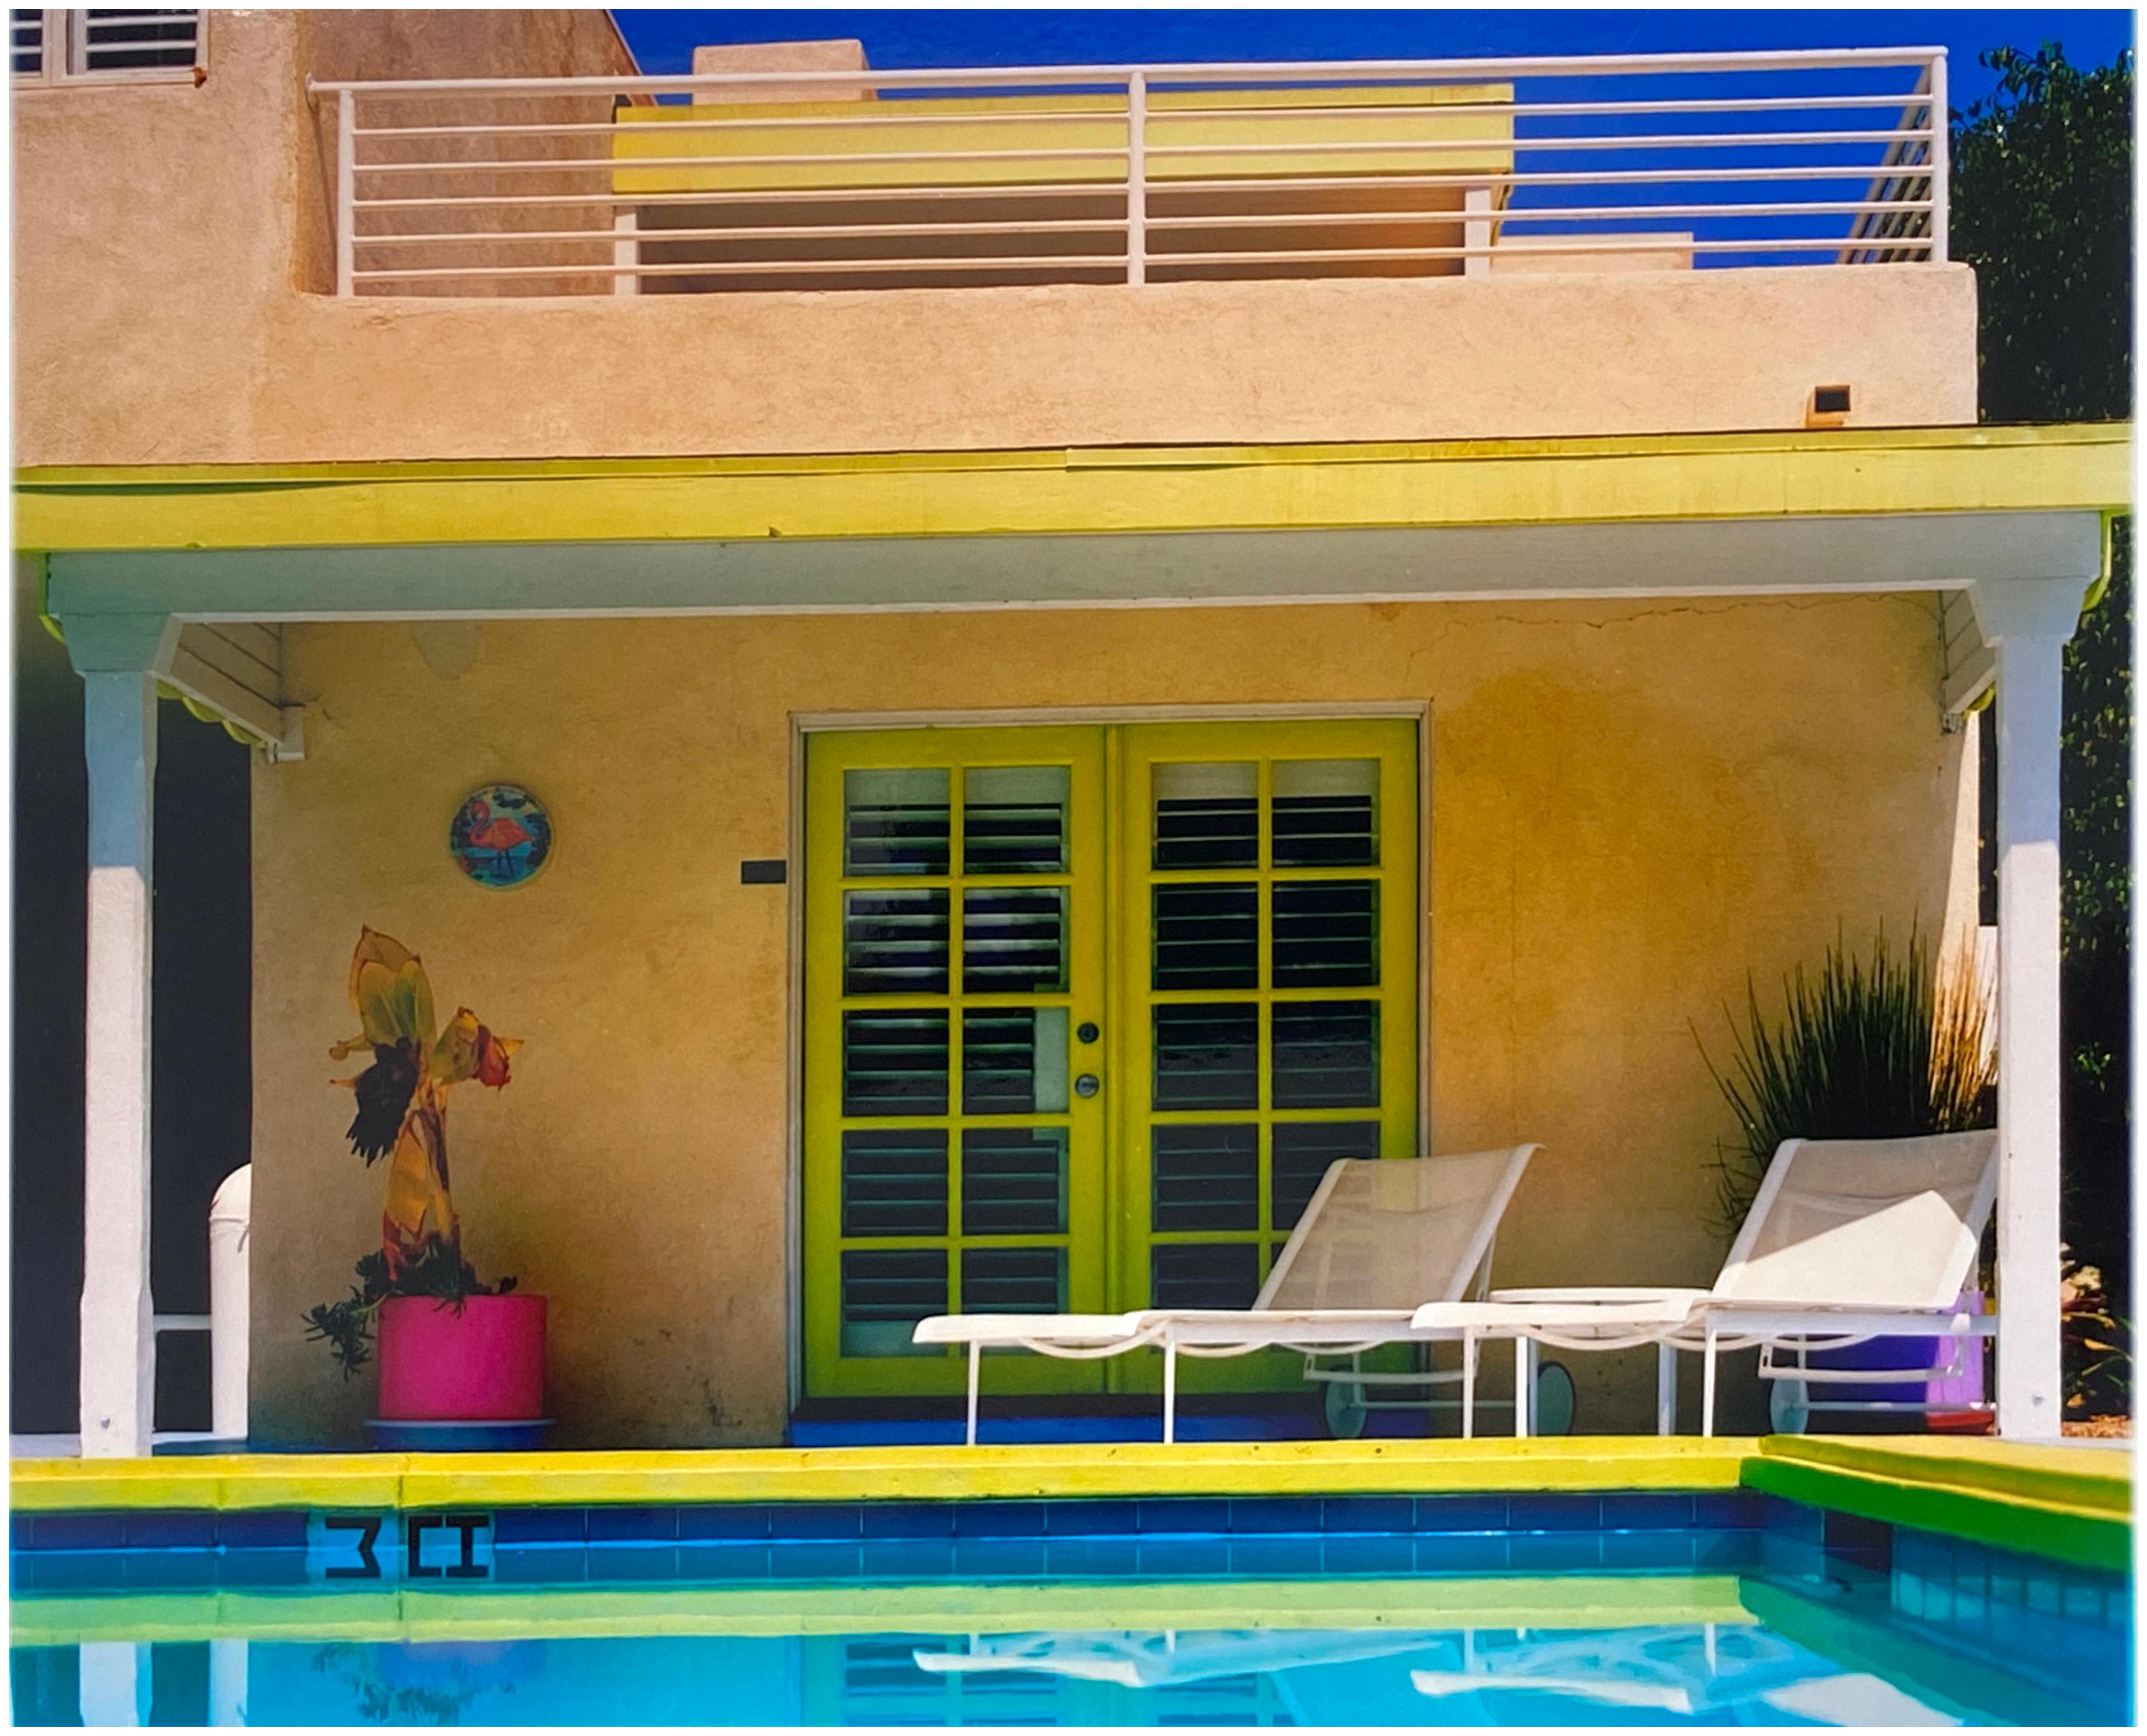 Palm Springs Poolside, photography by Richard Heeps at Ballantines Movie Colony. This artwork captures the classic mid-century Palm Springs architecture set against saturated blue skies and the cool pool with accents of pink and almost neon